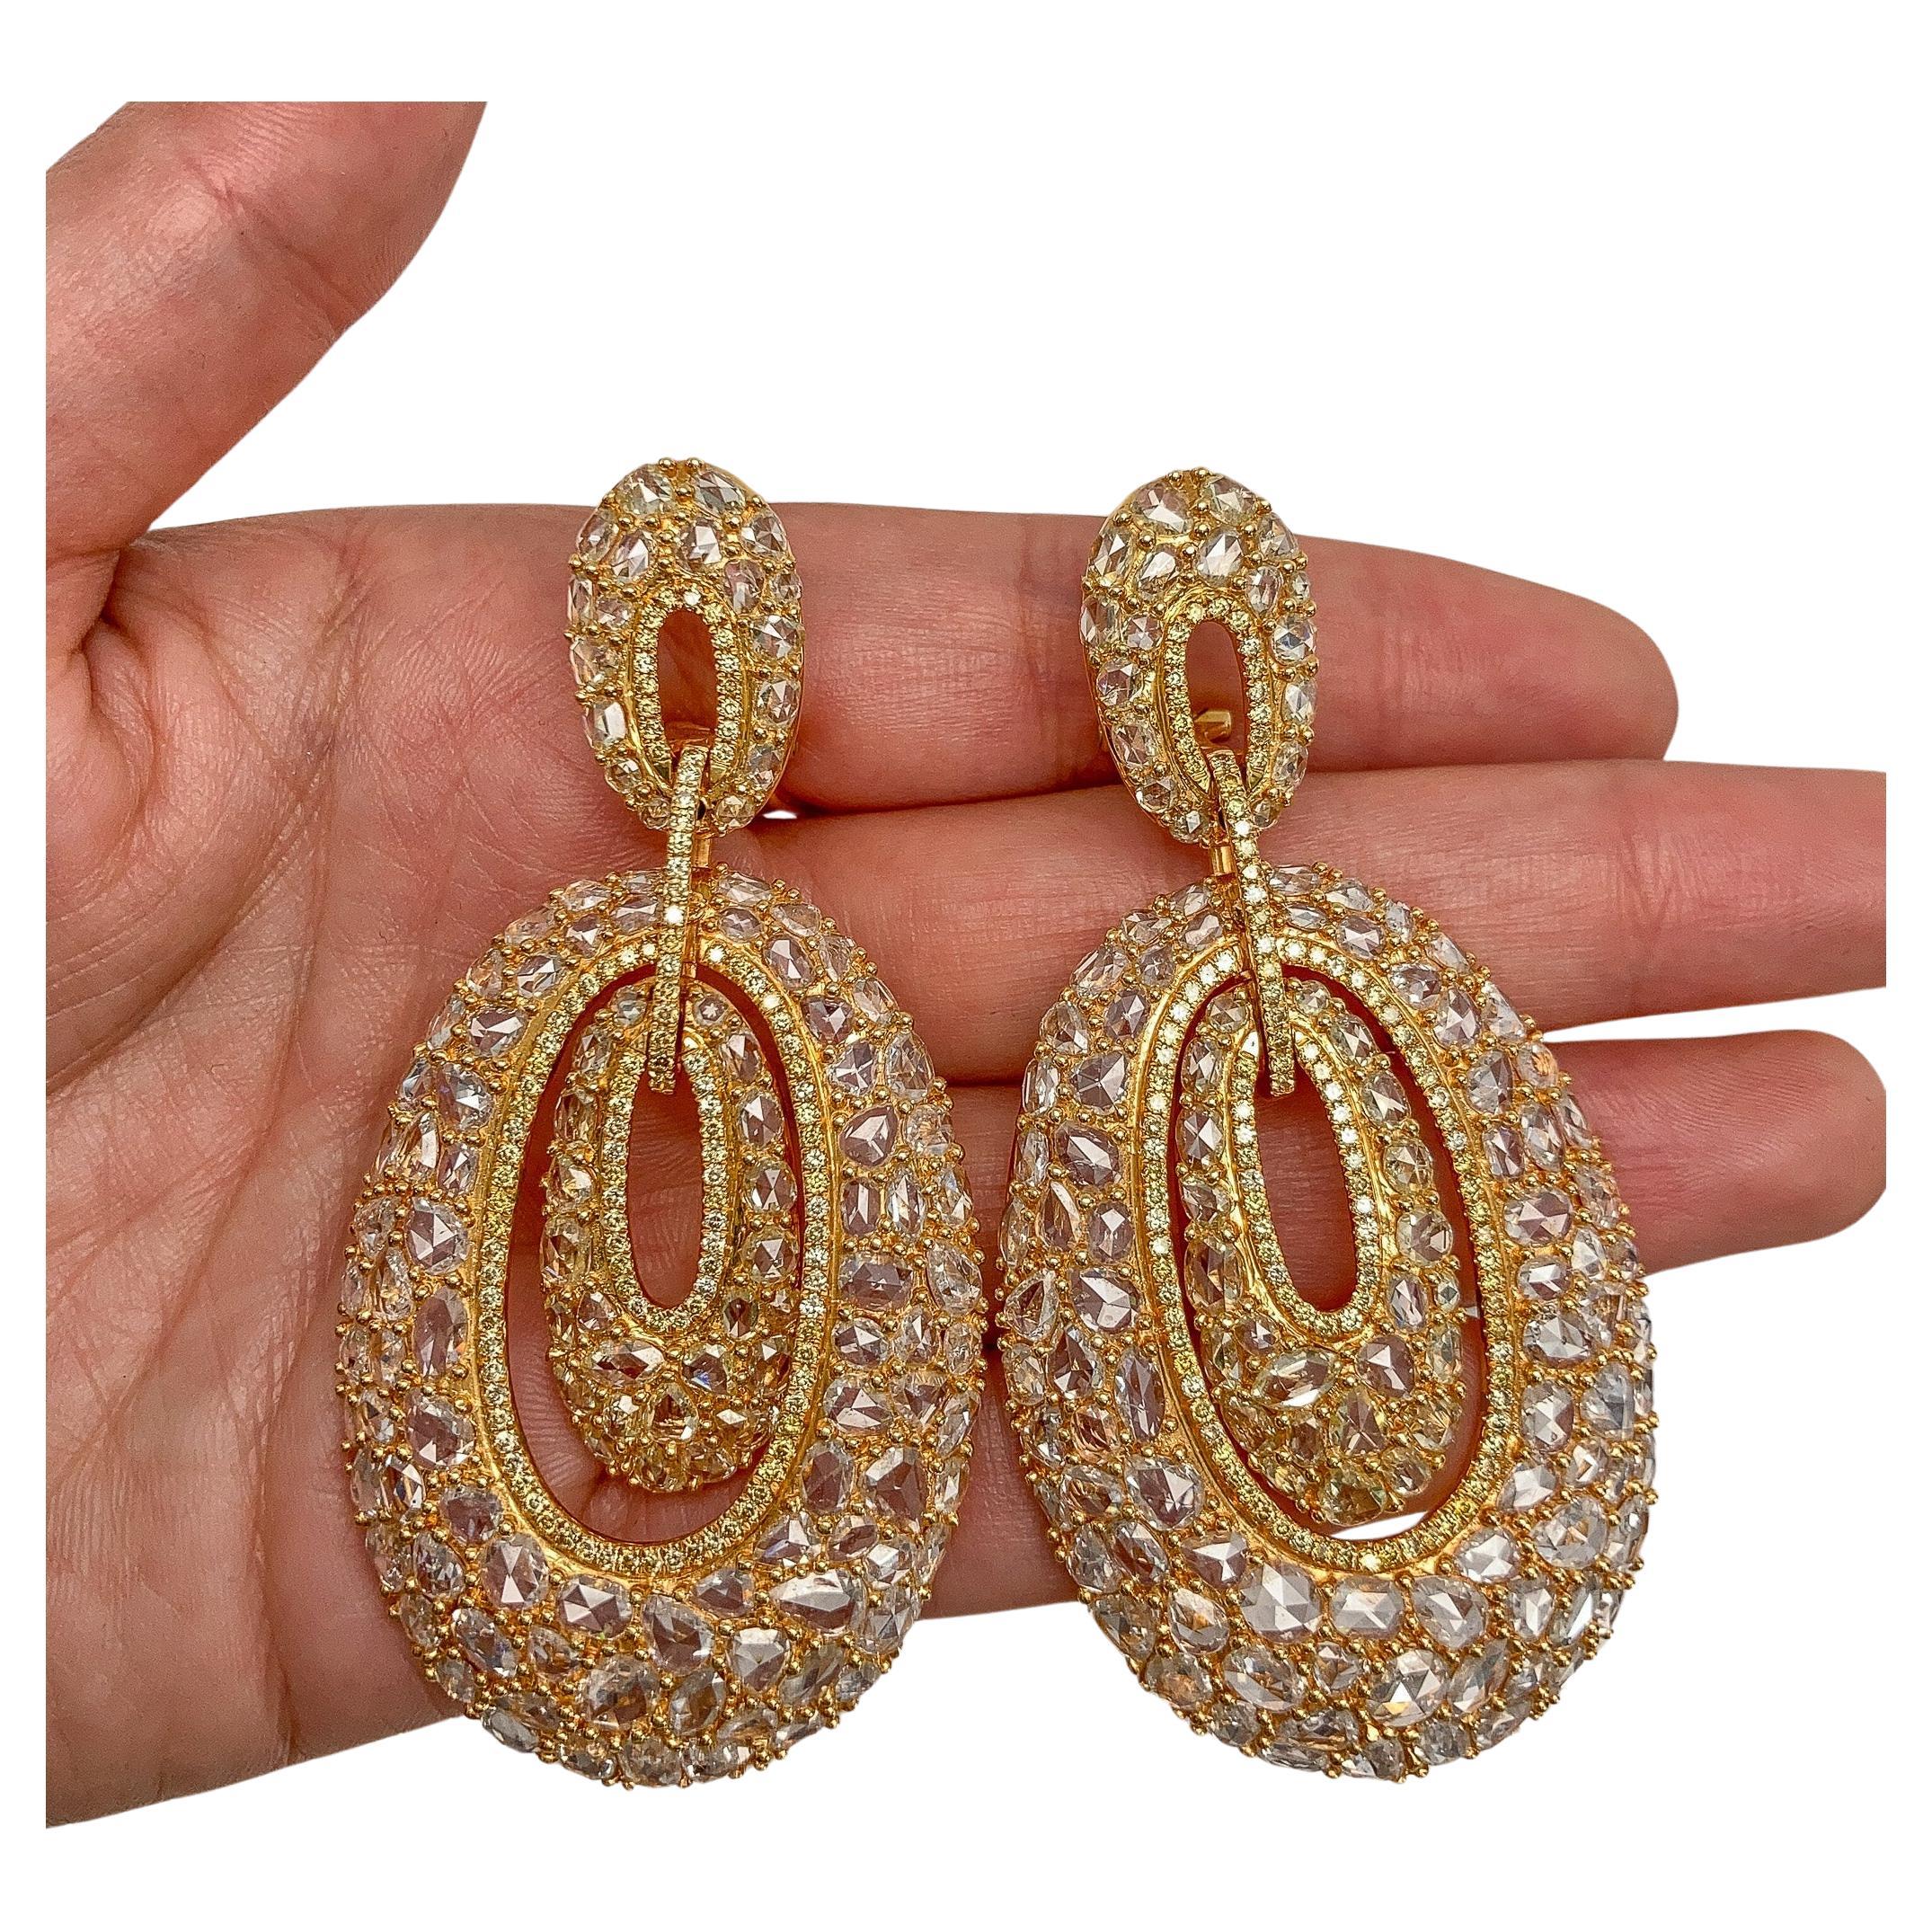 These vintage-inspired chandelier earrings feature 24.00 carats of rose-cut diamonds, set in 18-karat gold. They exude timeless elegance and charm with a length of 1.4 inches.